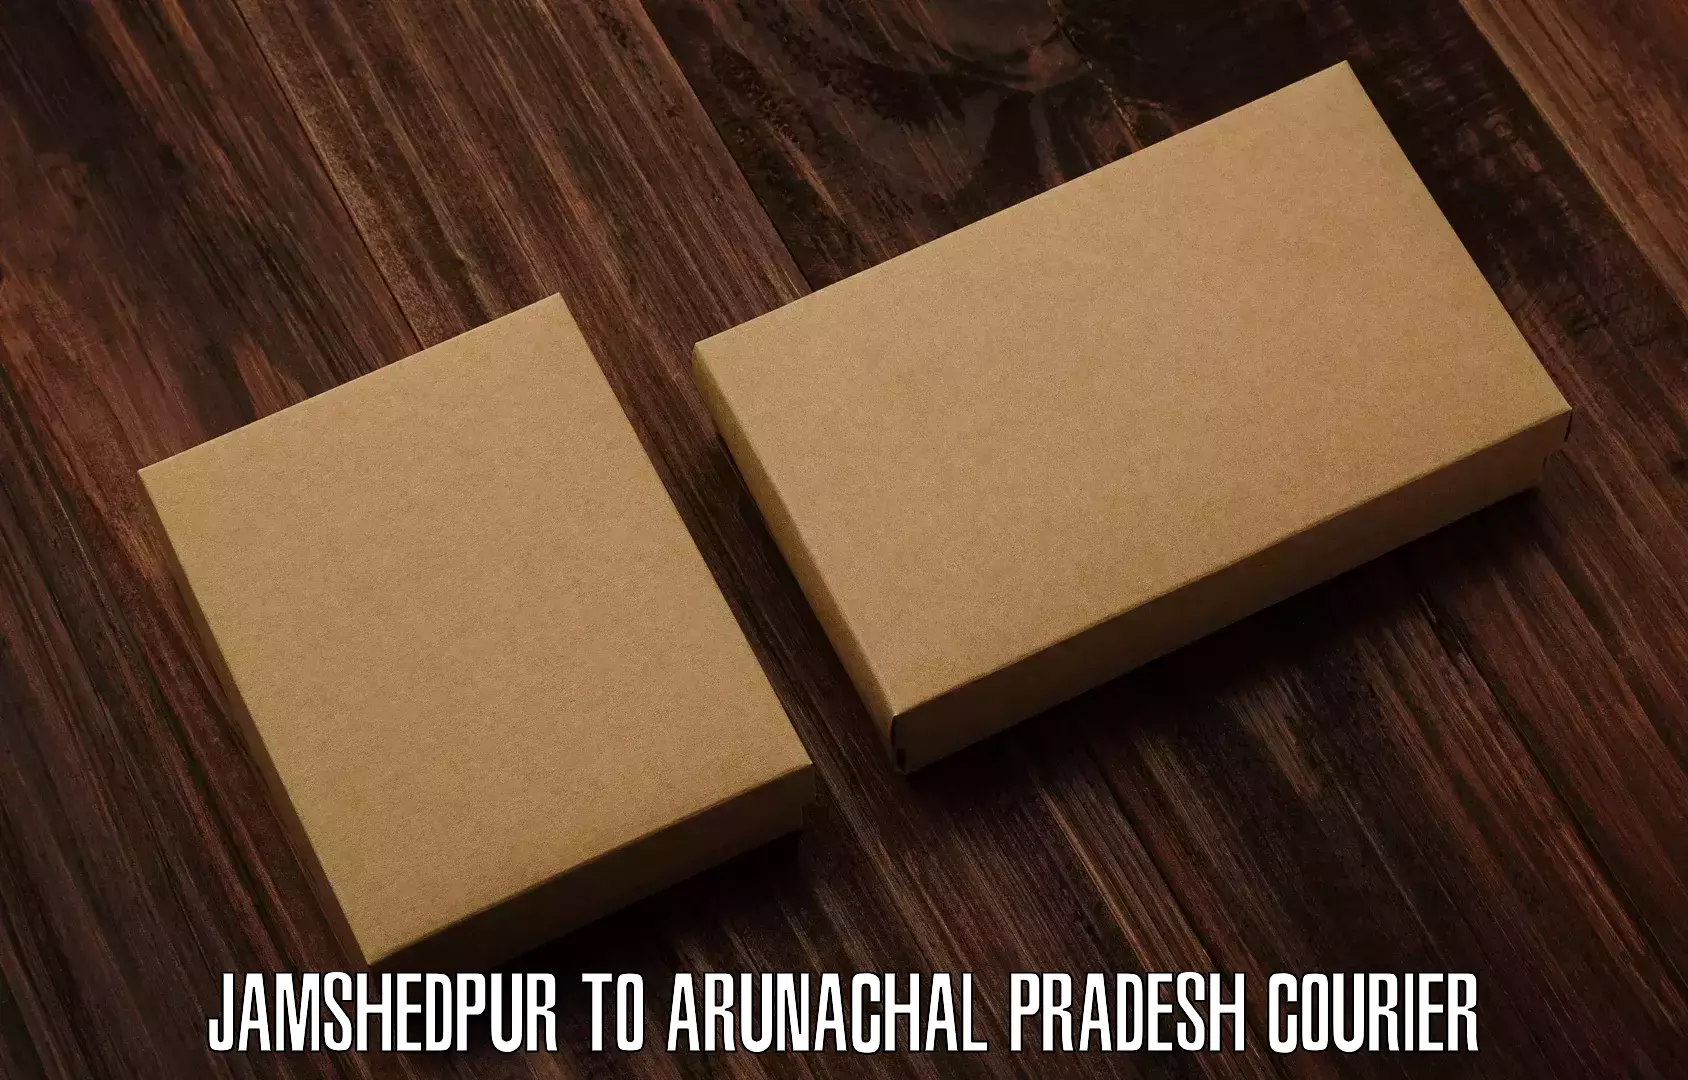 High-speed parcel service Jamshedpur to Lohit